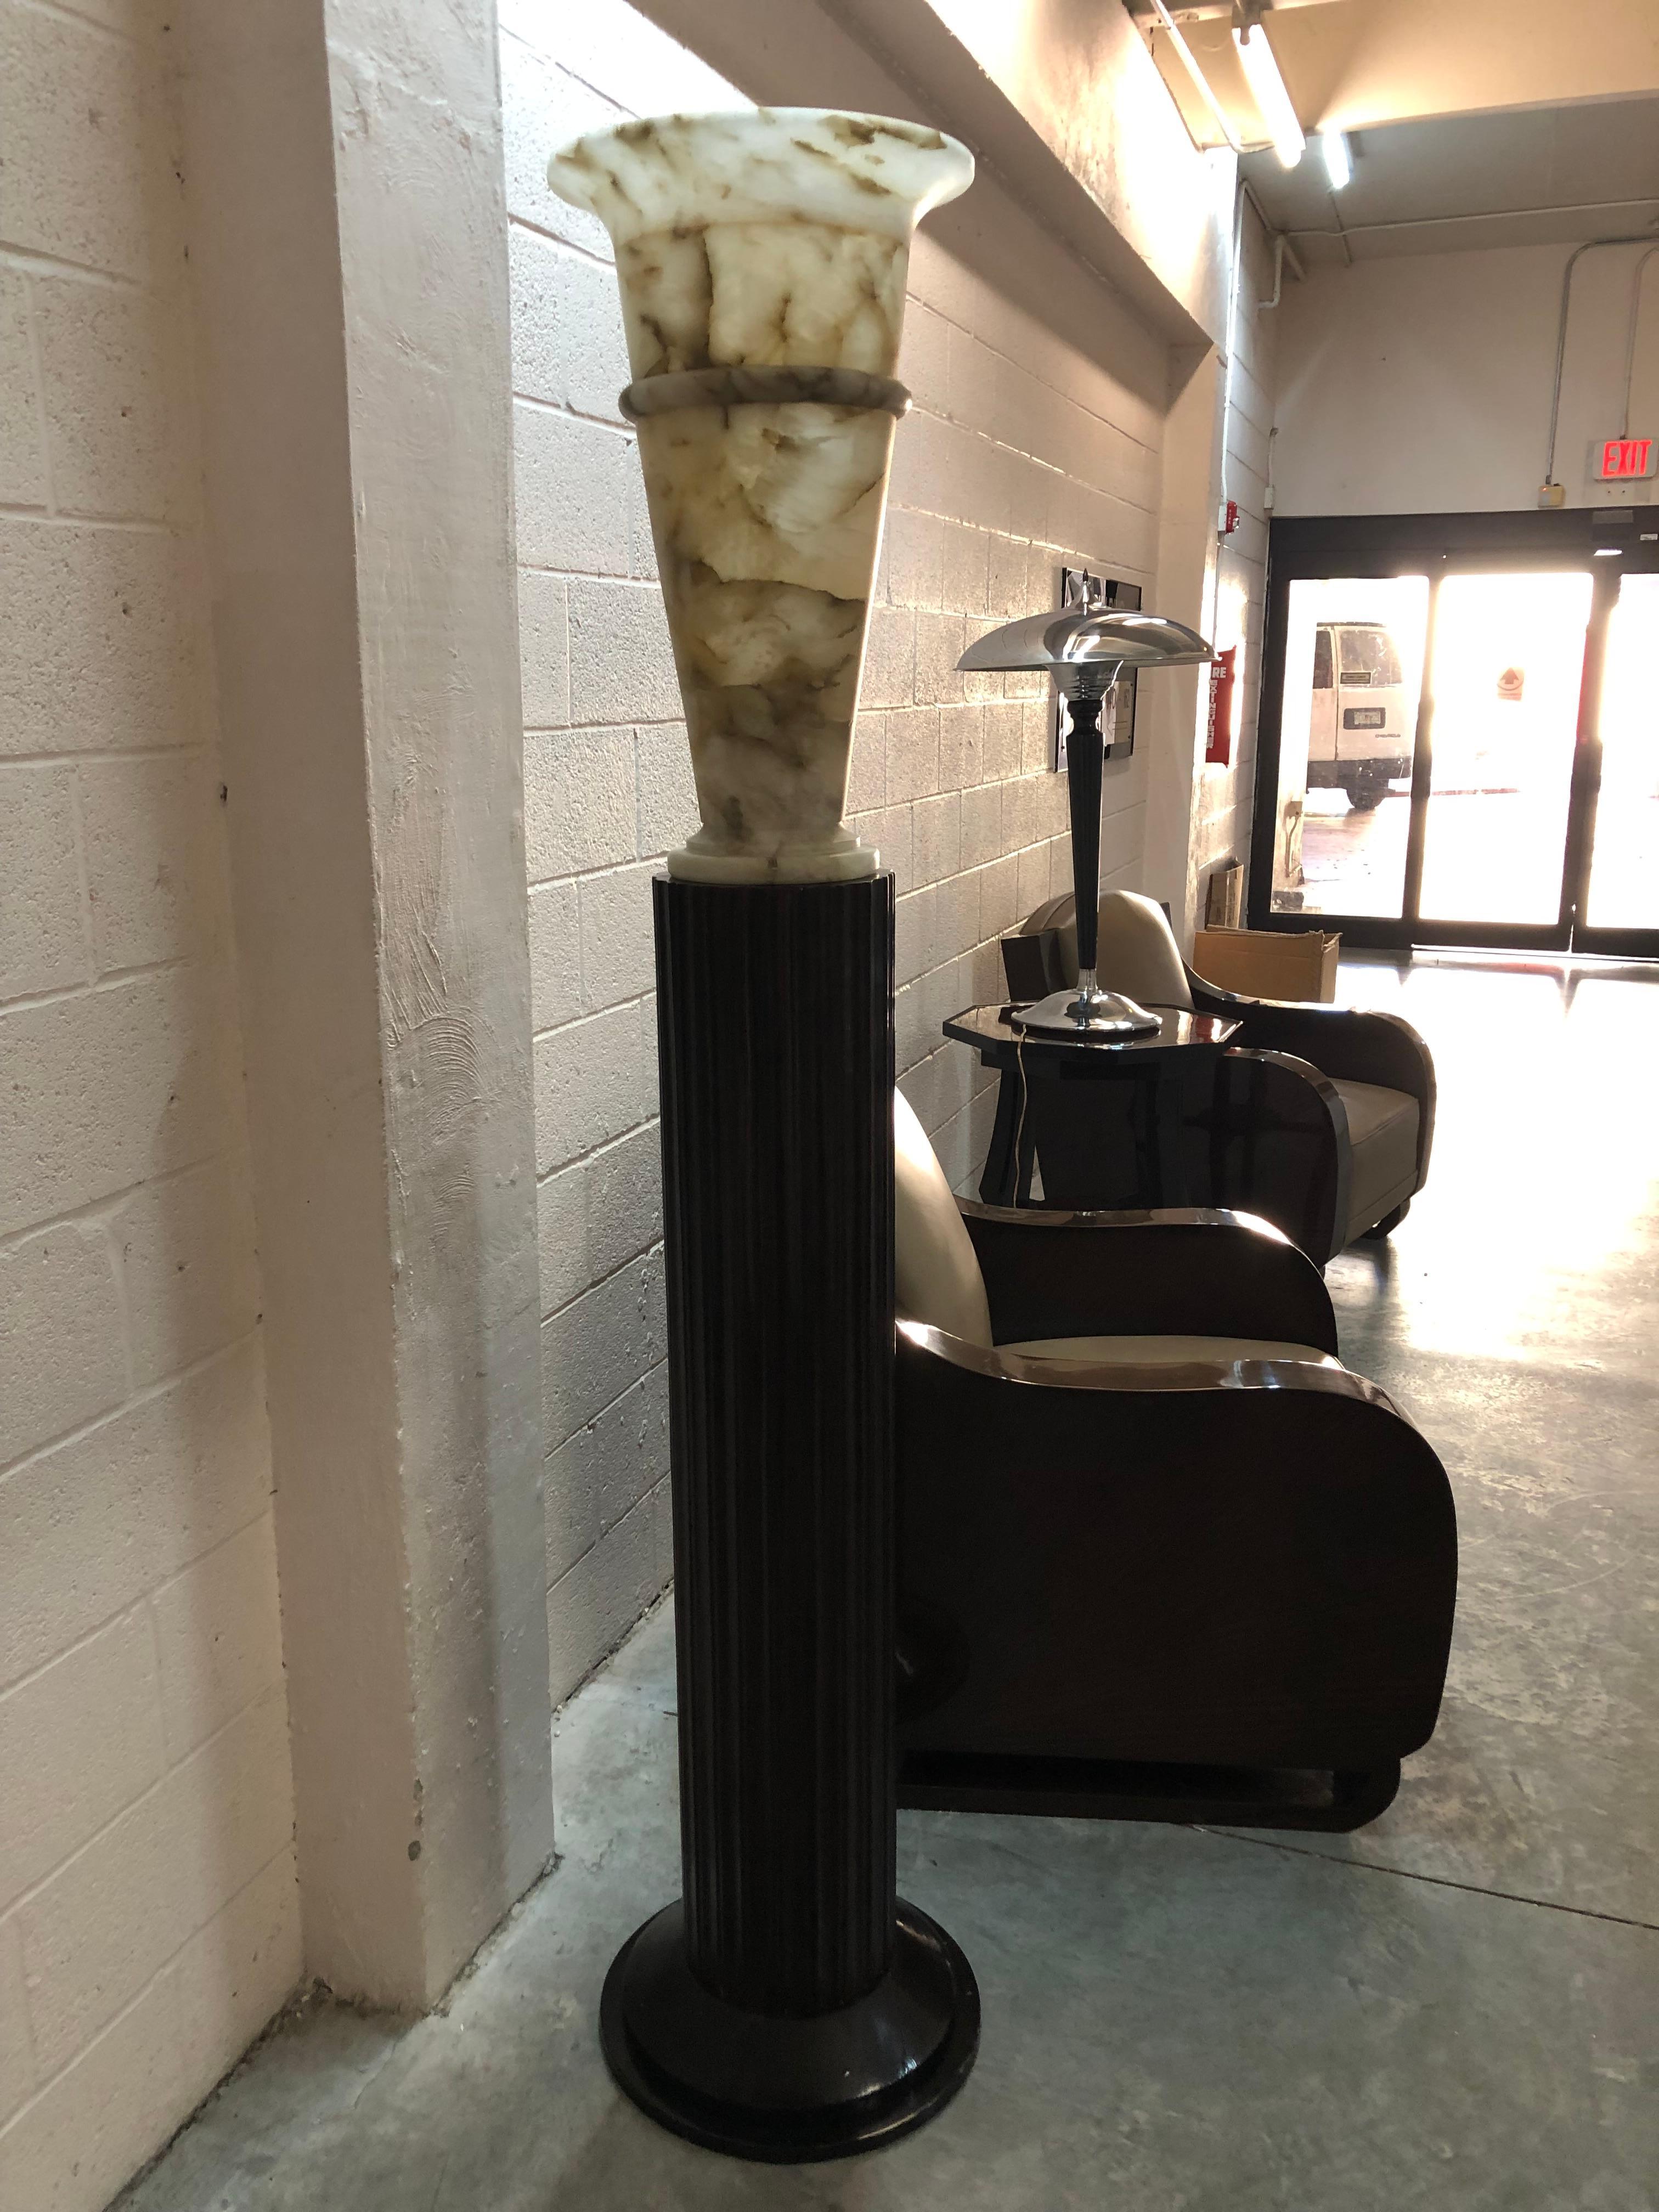 Pair of Art Deco Floor Lamps, France, Materials: Wood and Alabaster, 1930 For Sale 13